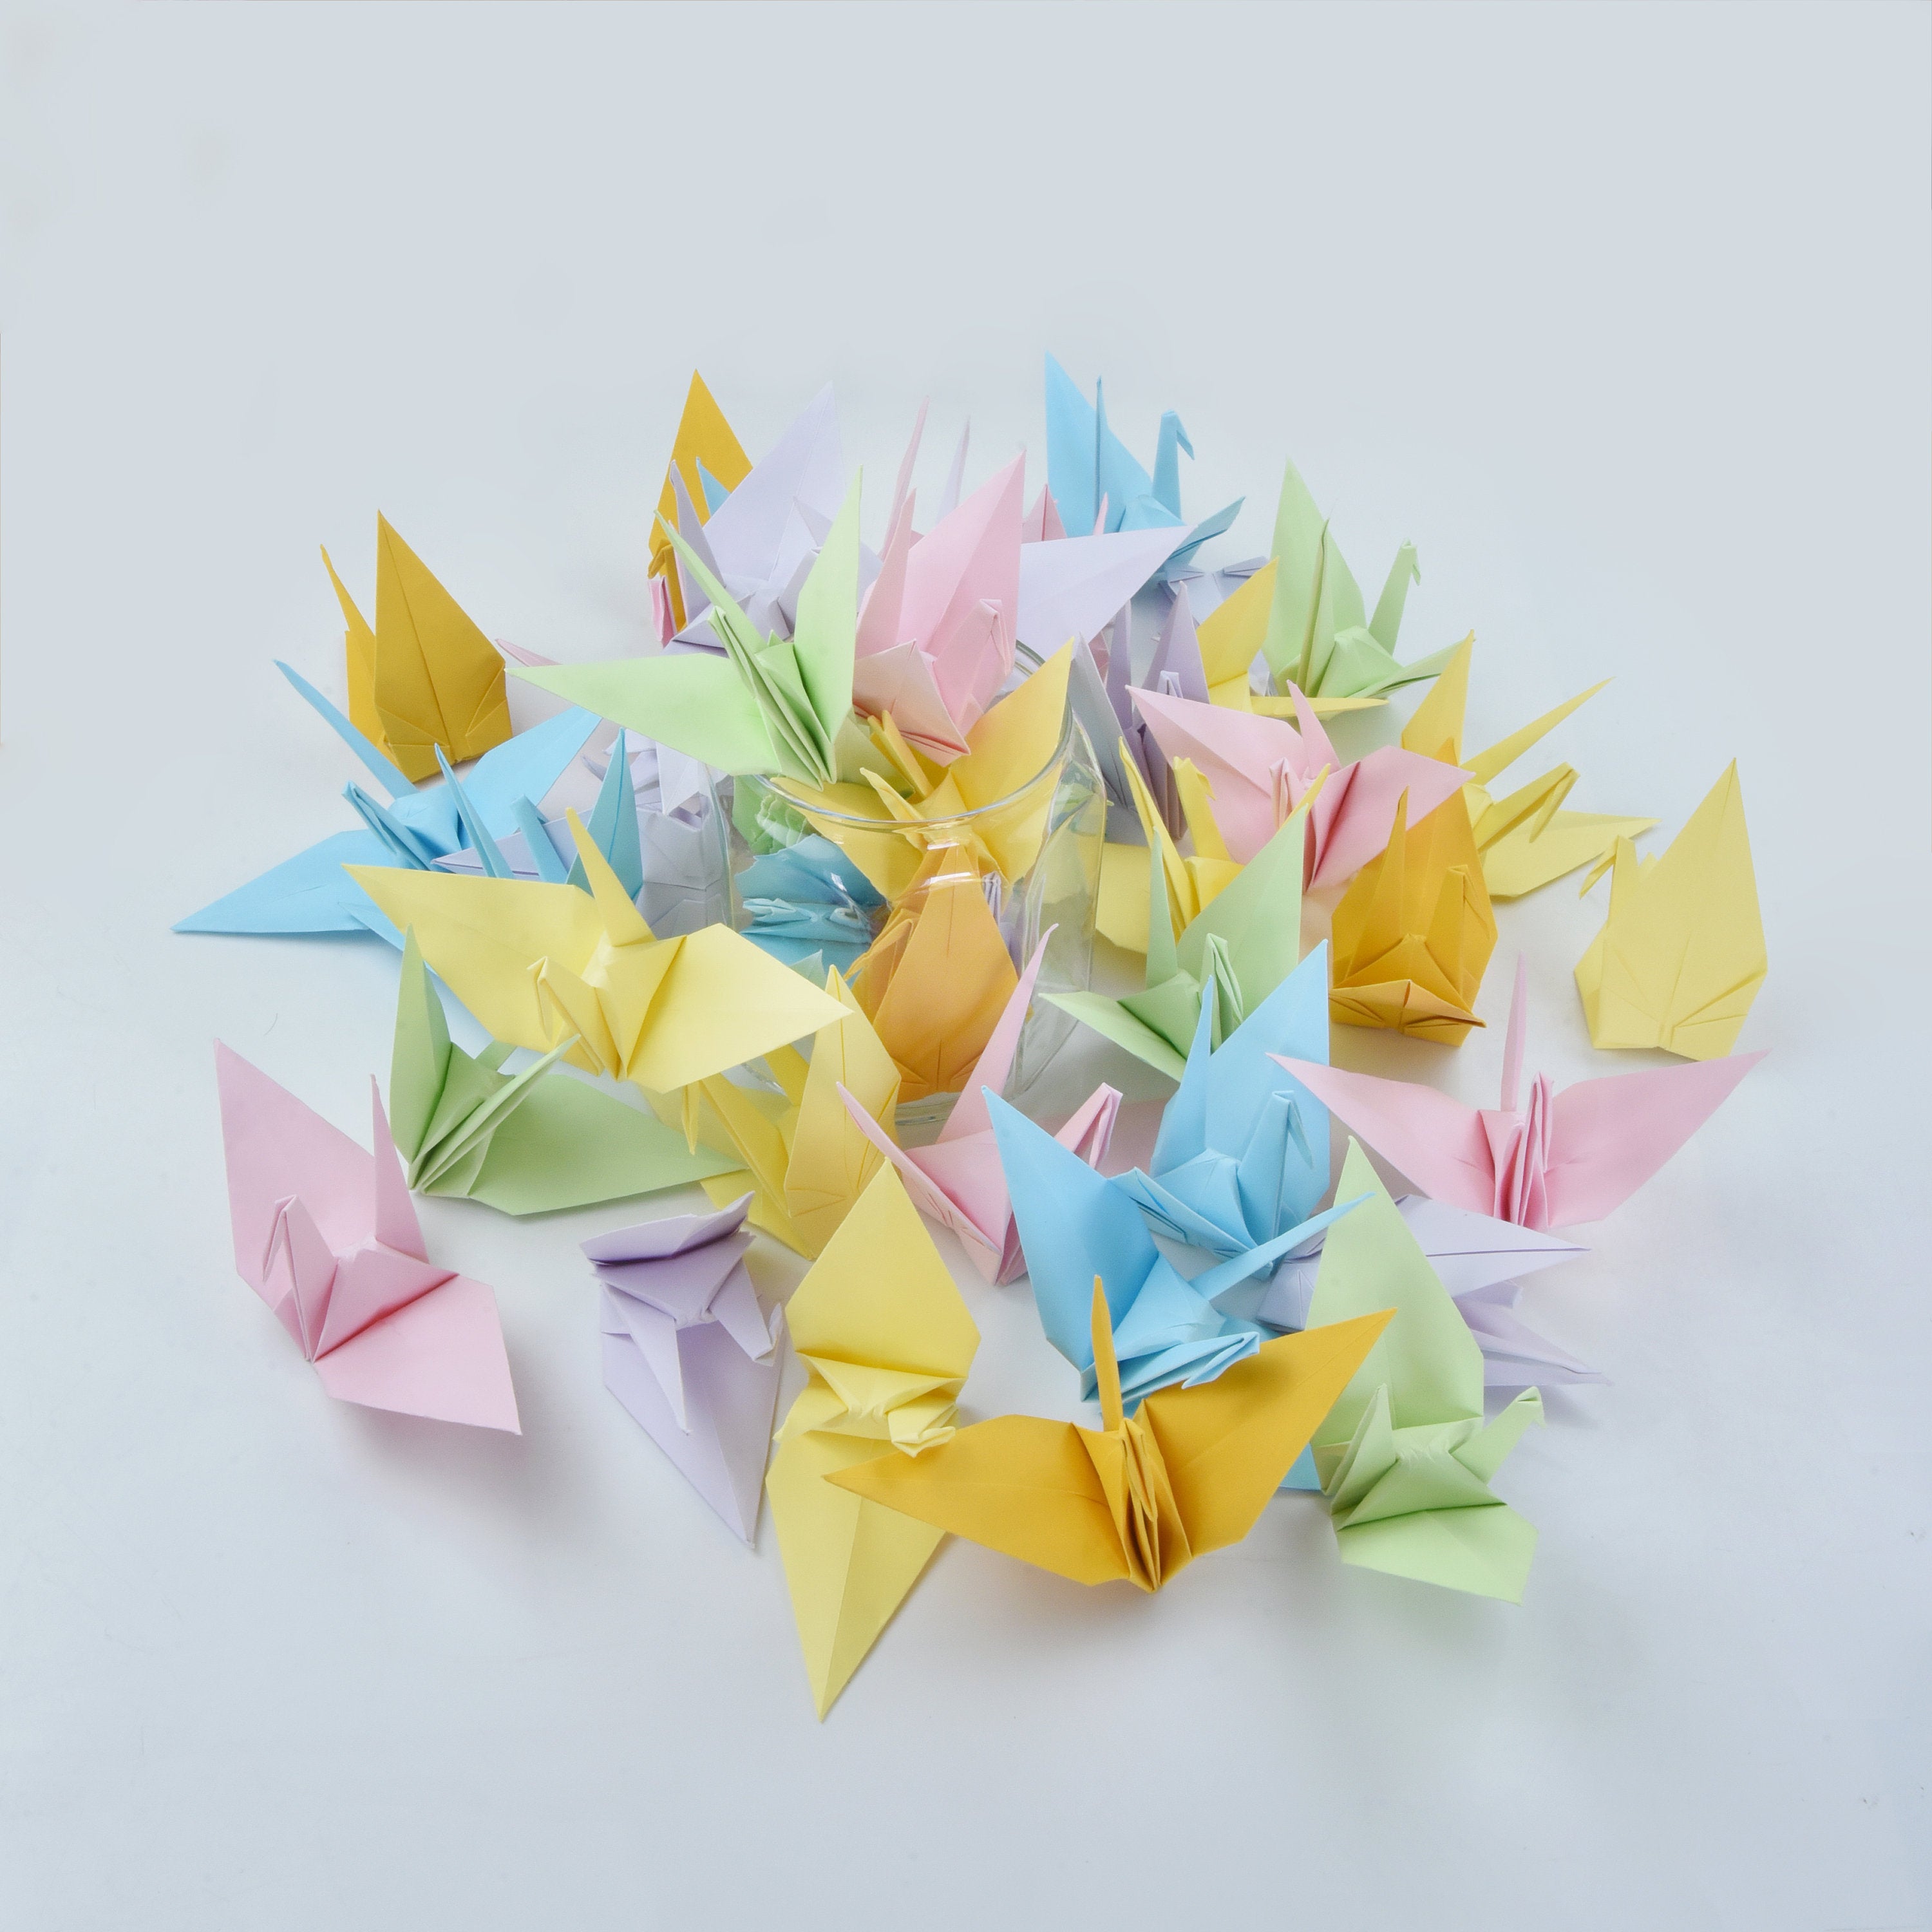 50 Origami Paper Cranes Mixed color Sweet color Large 6 inches Bird Origami Crane 15 cm 6 inches for Japanese Wedding gift